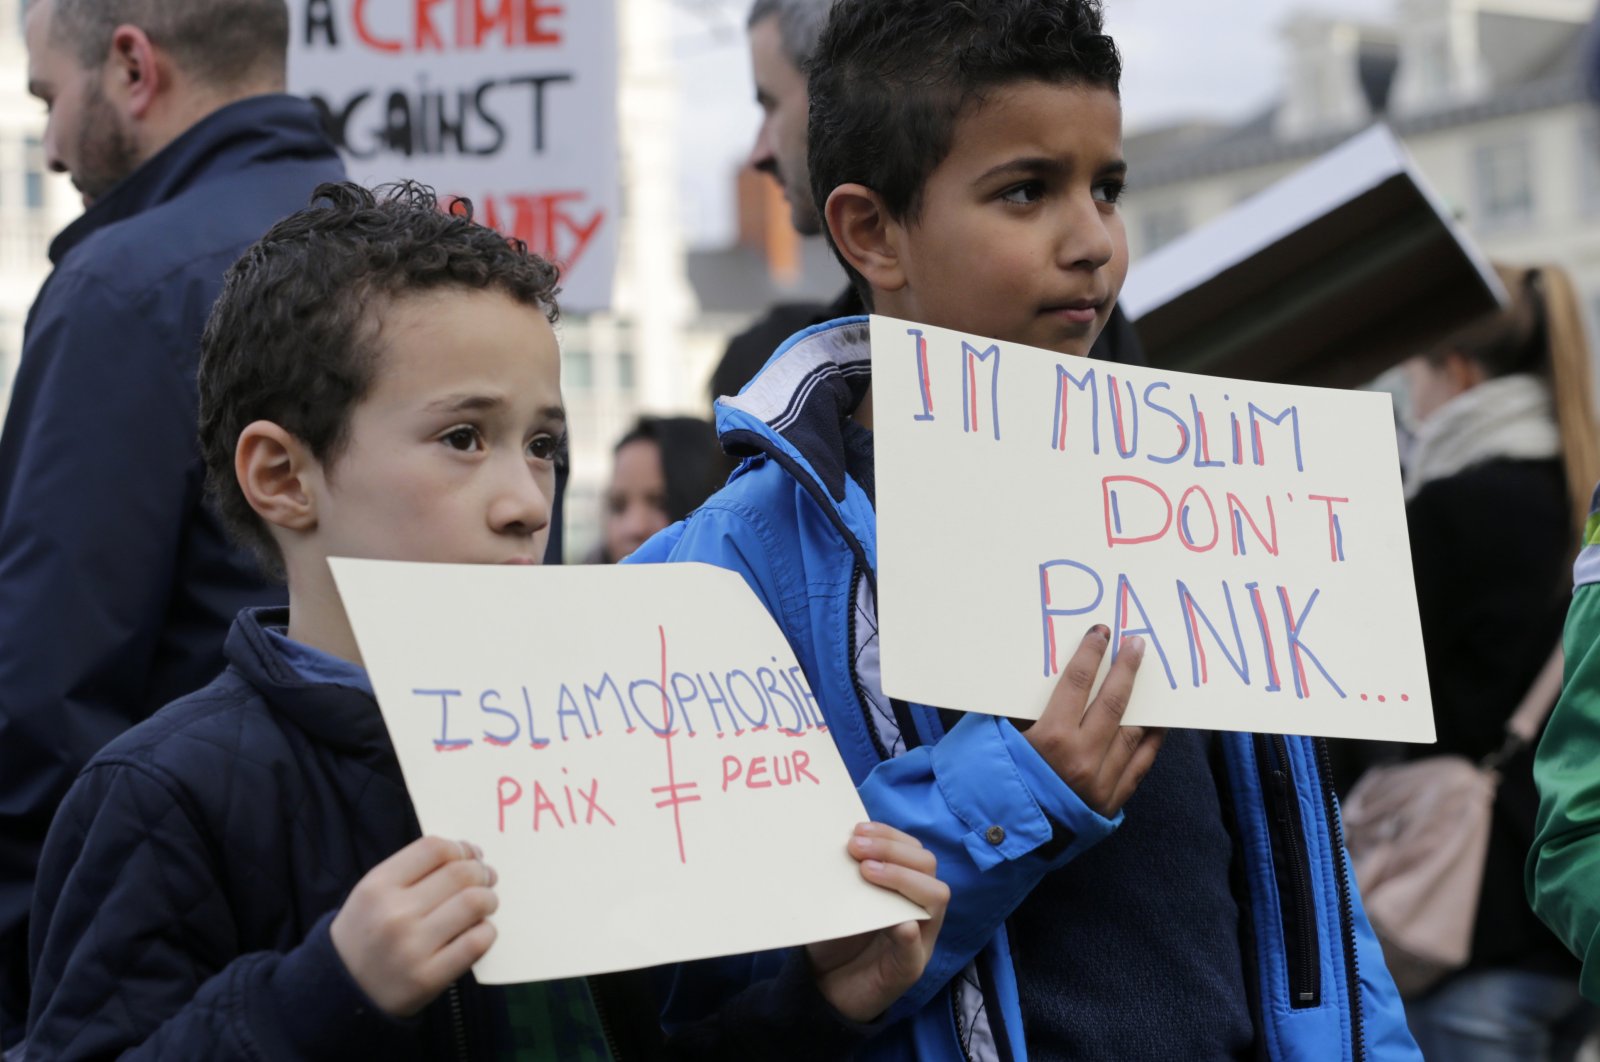 Two boys show signs during a protest against Islamophobia in Brussels, Sunday, Oct. 26, 2014. (AP File Photo)